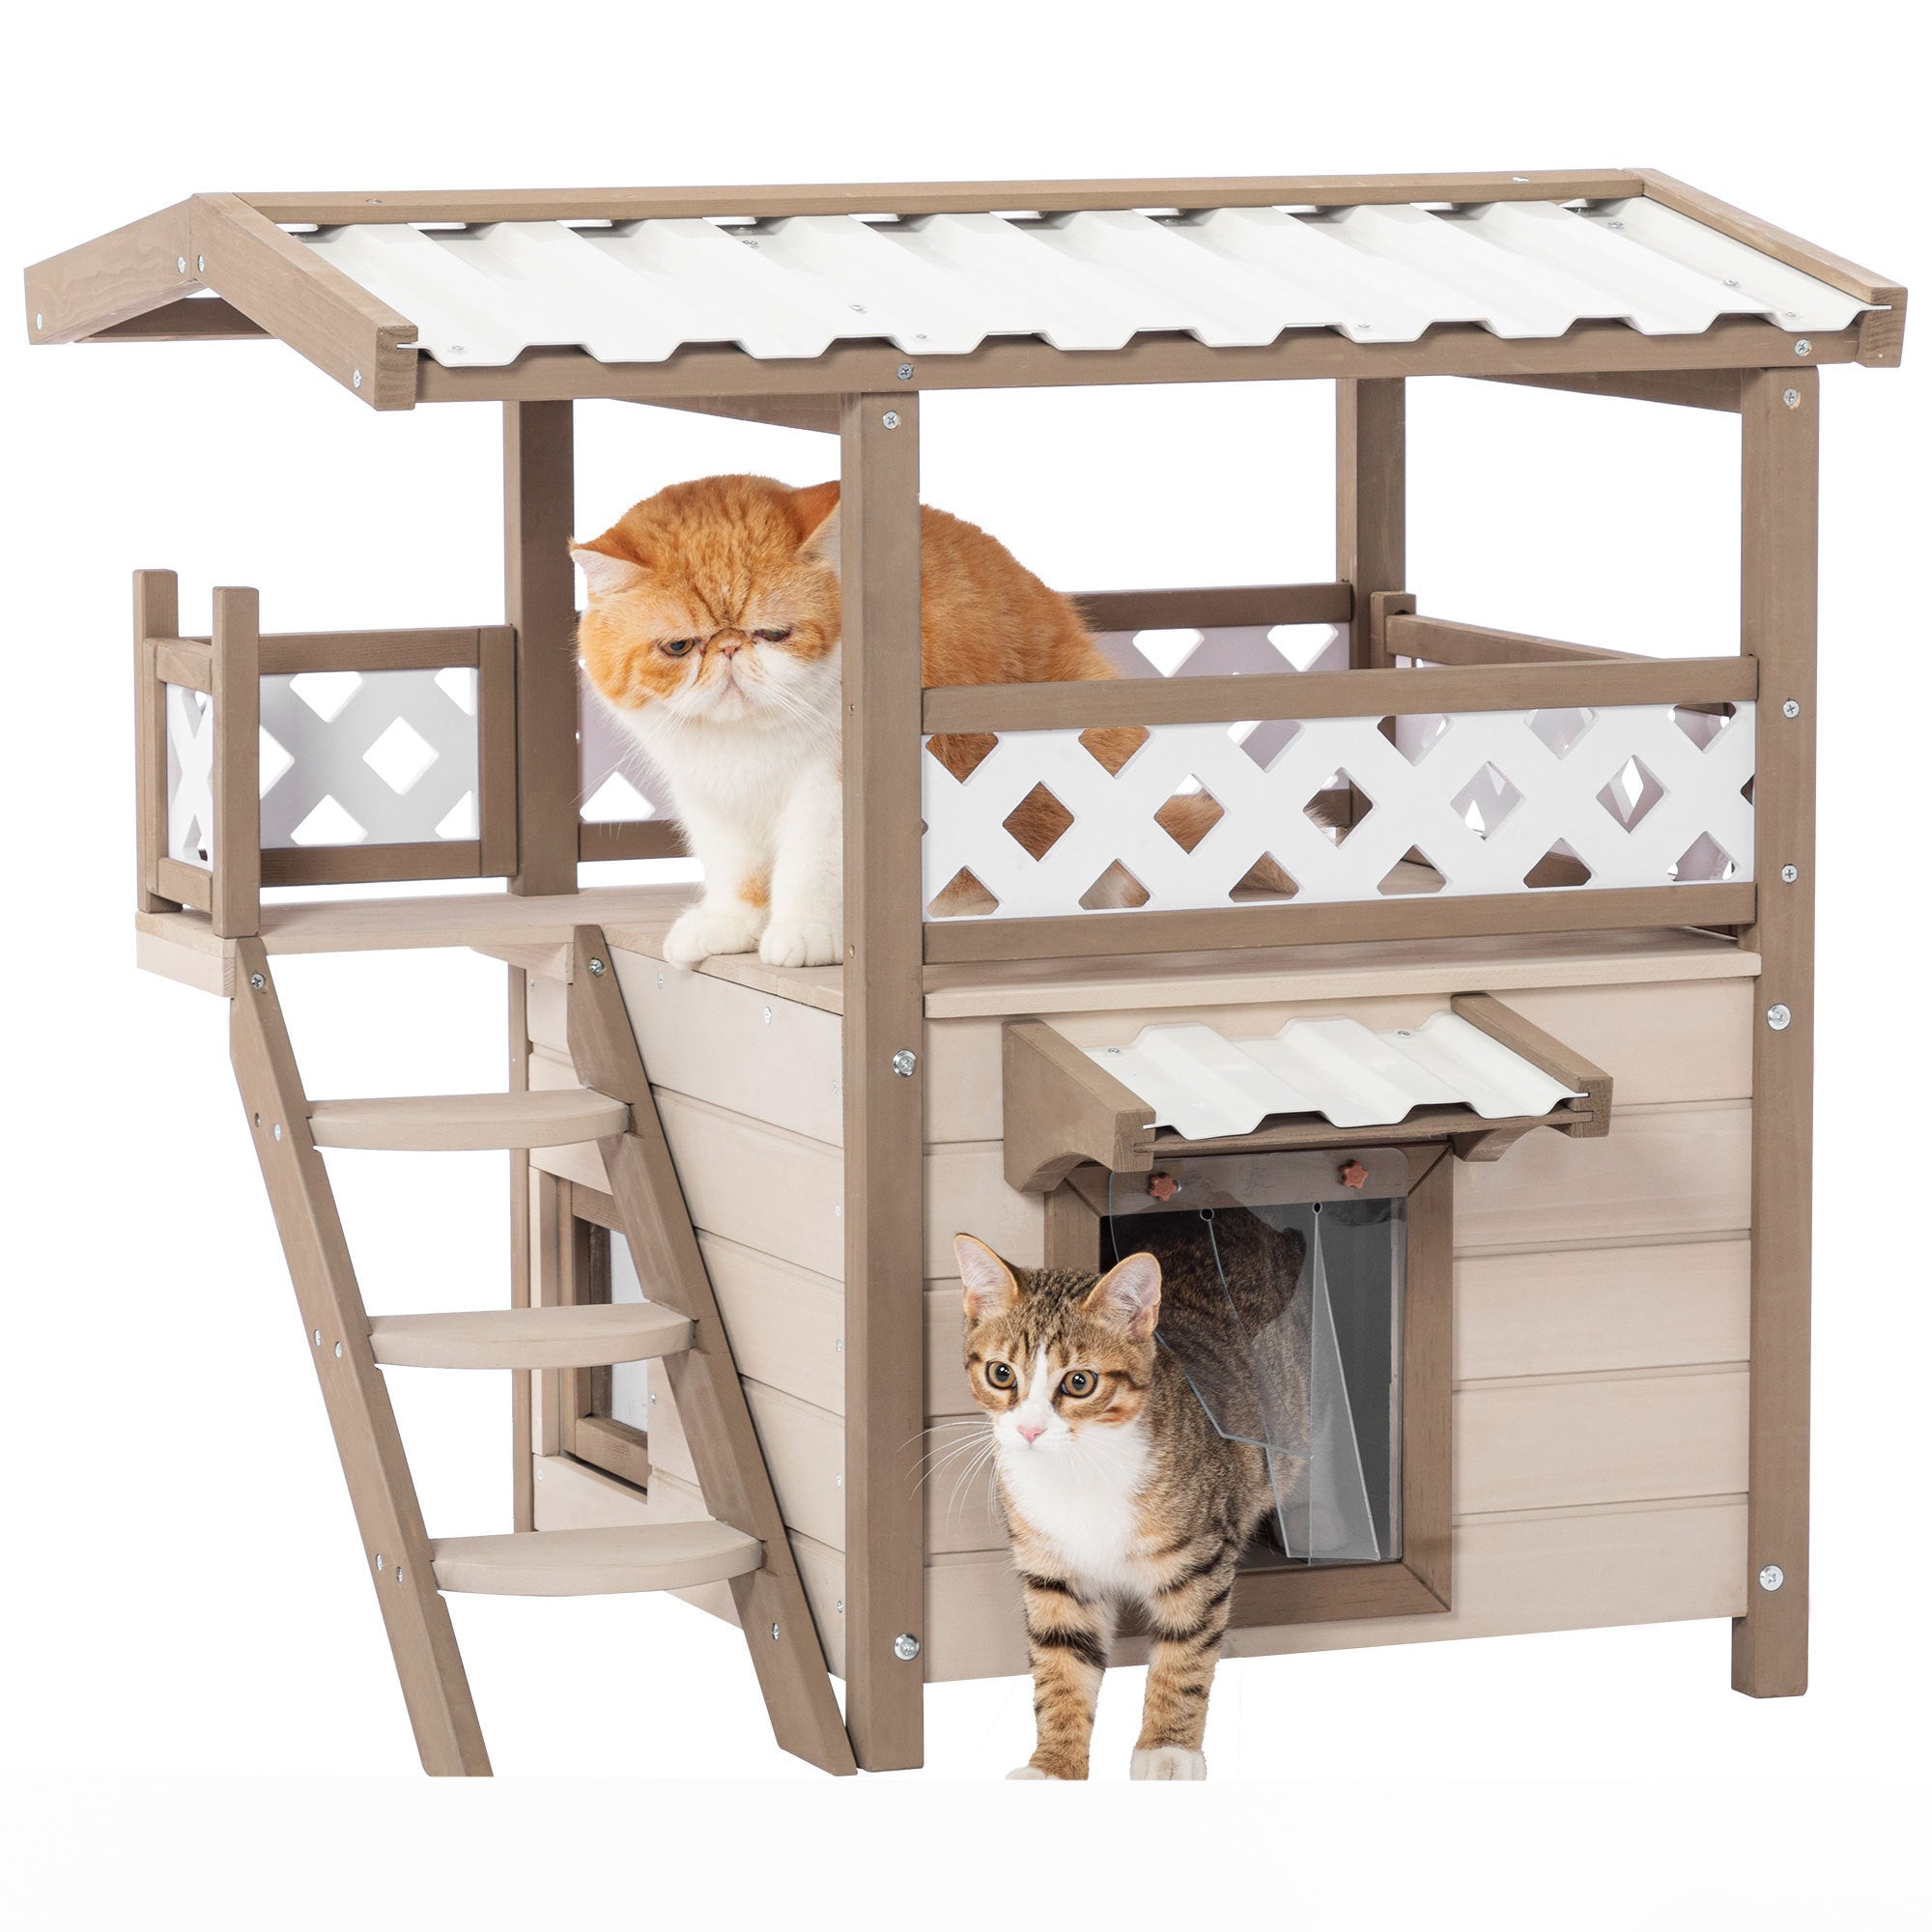 Outdoor Indoor Kitty Houses with Durable PVC Roof